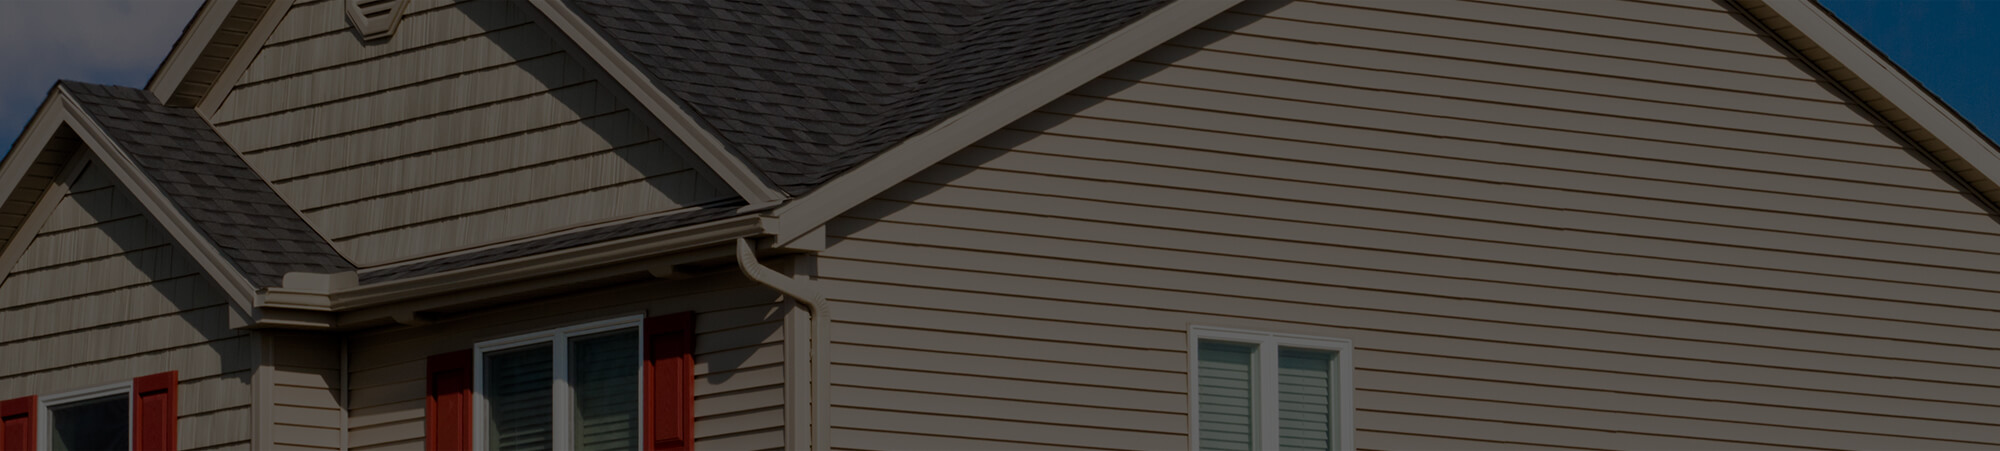 siding installation and replacement services in menasha wi